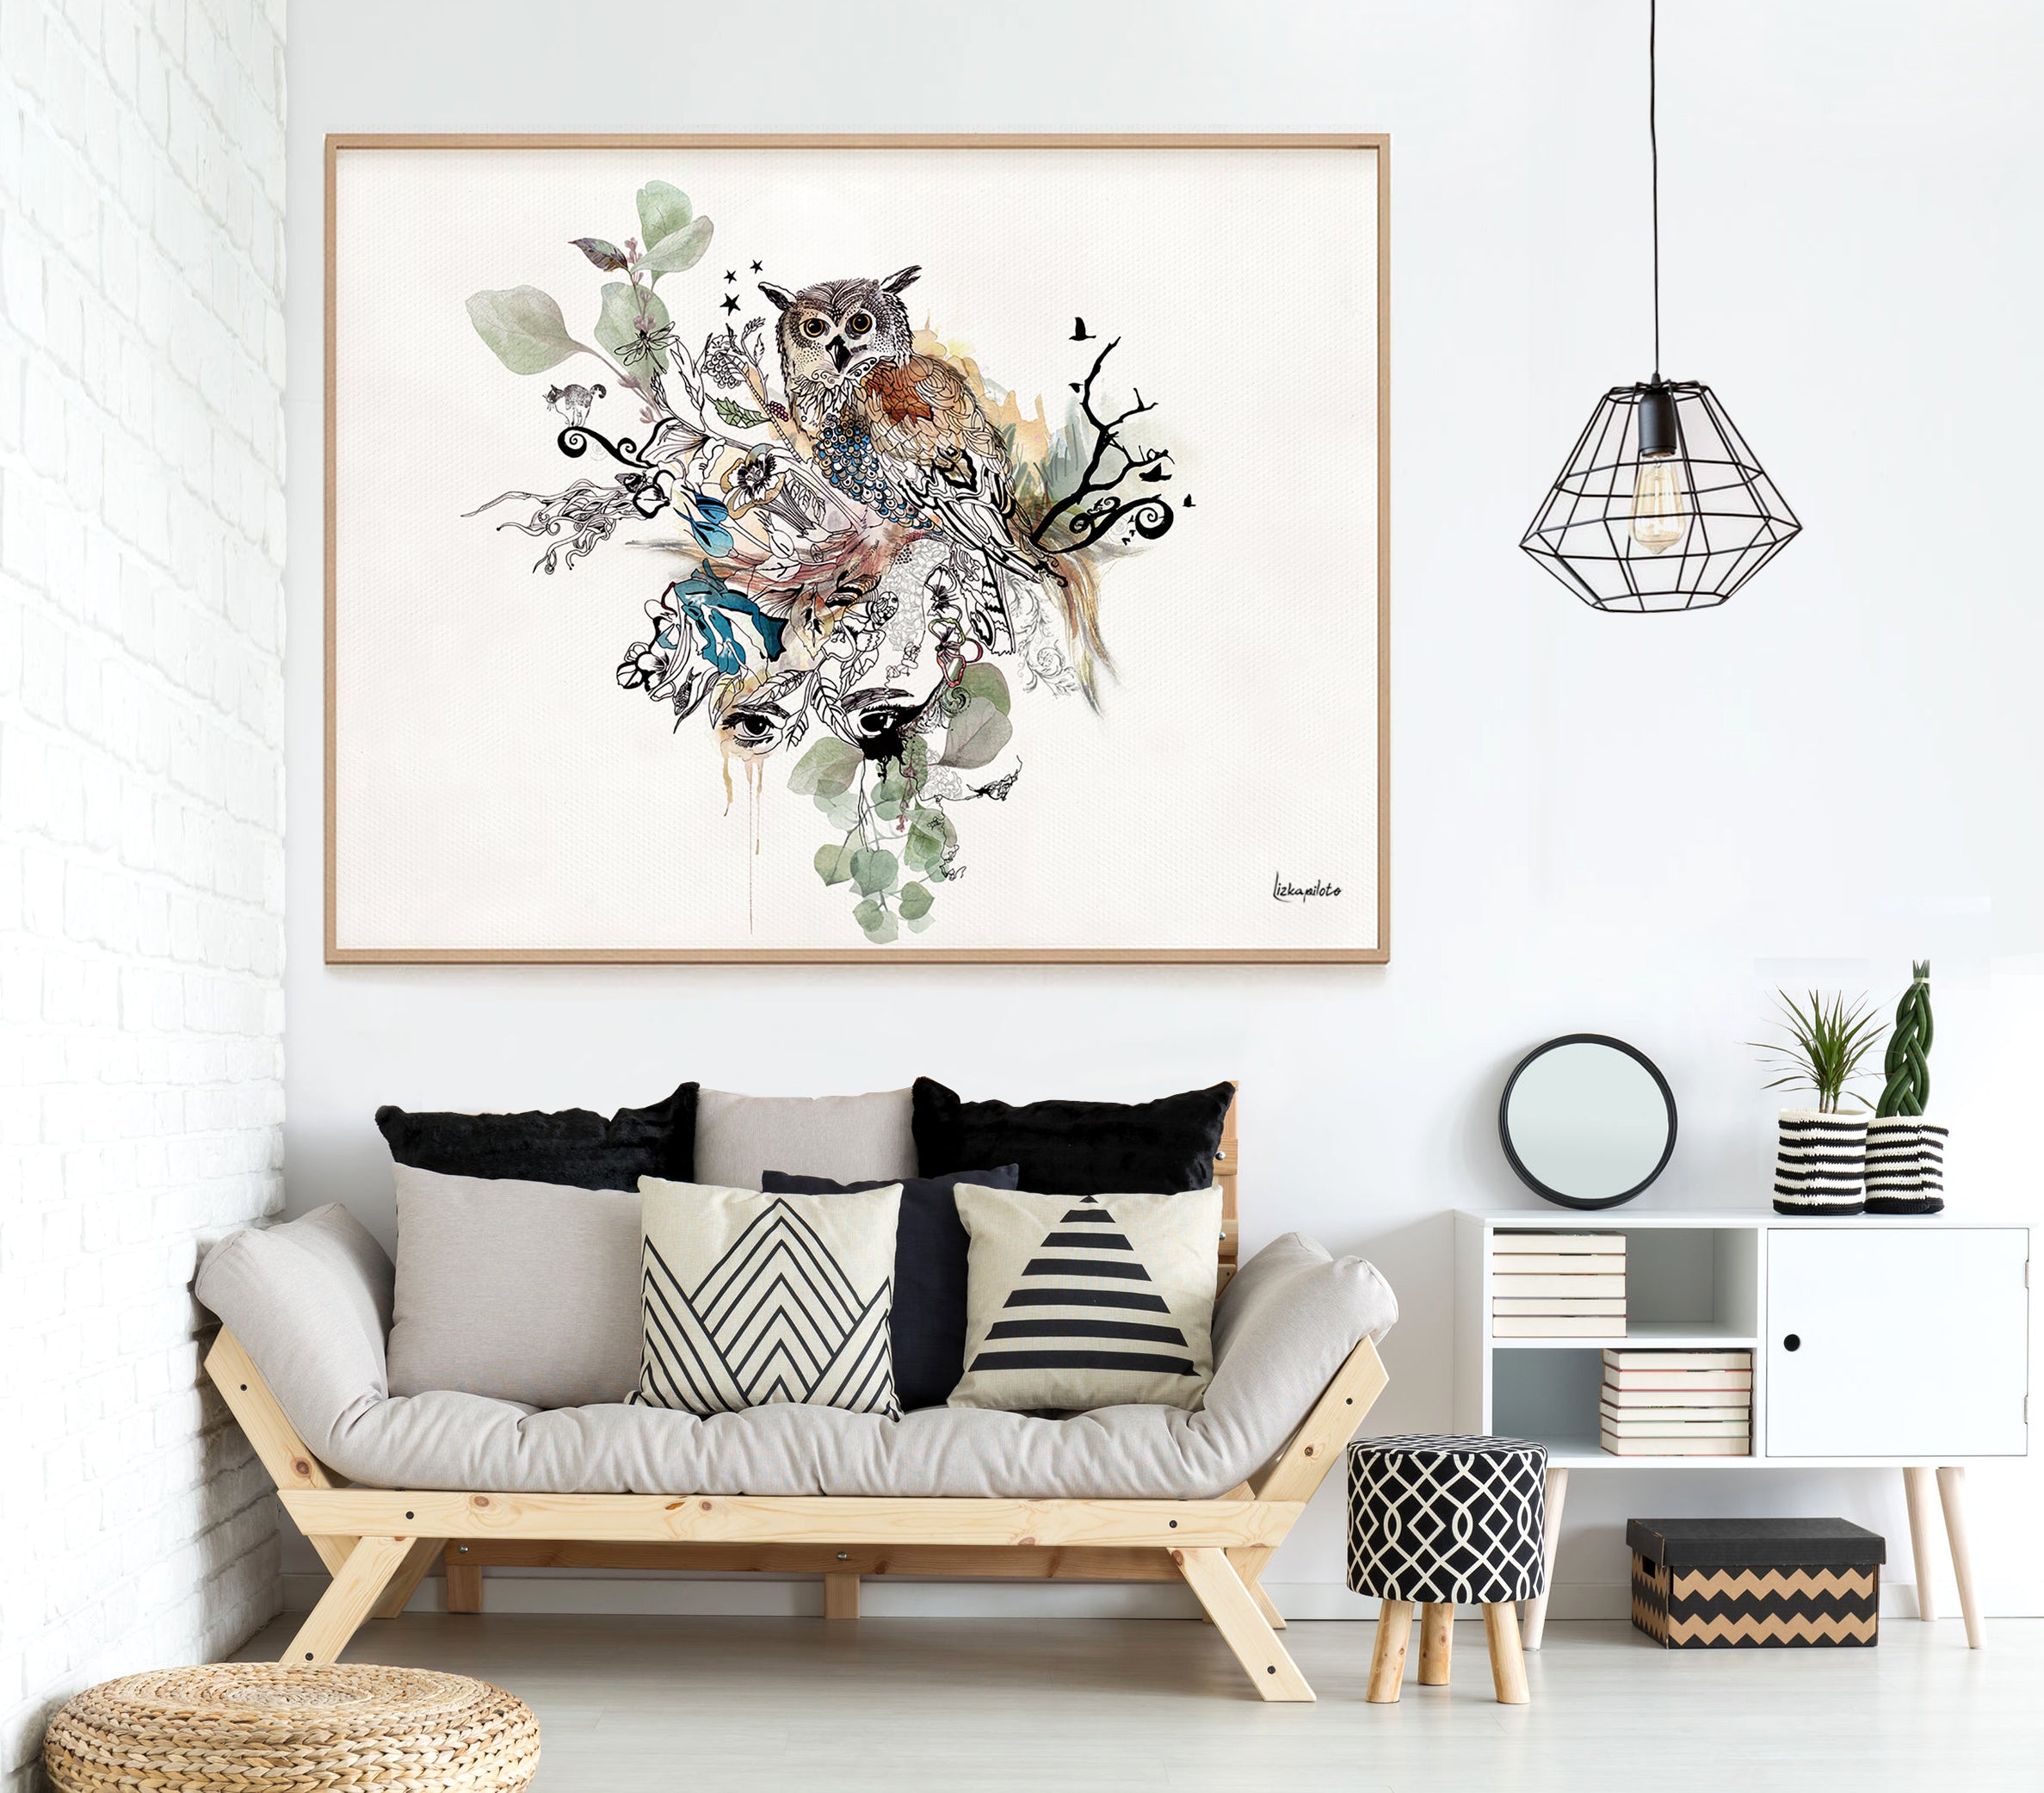 watercolor owl art, framed and hanged above sofa